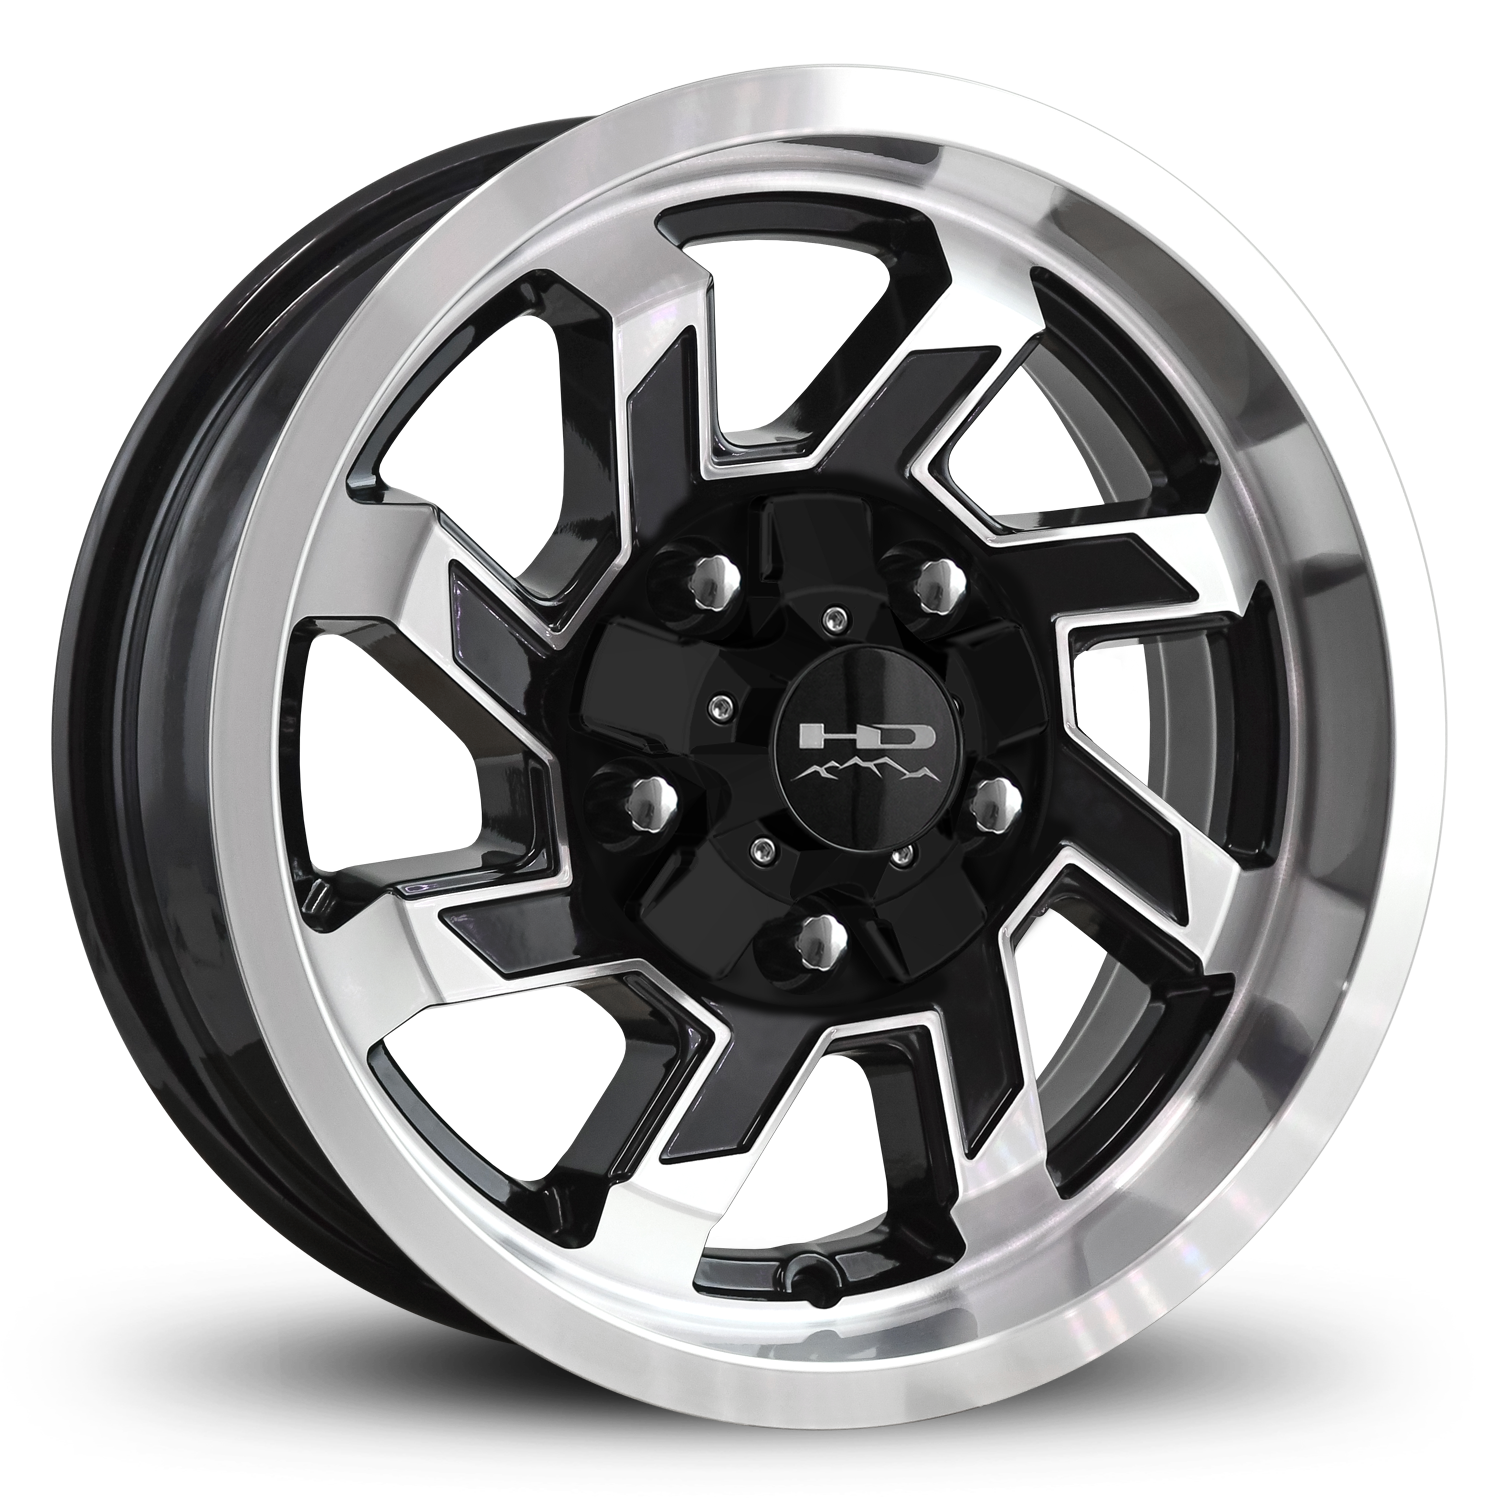 HD Off-Road SAW Custom Trailer Wheels in 15x6.0 in 5 lug Gloss Black Machined Face & Lip for Unility, Boat, Car, Construction, Horse, & RV